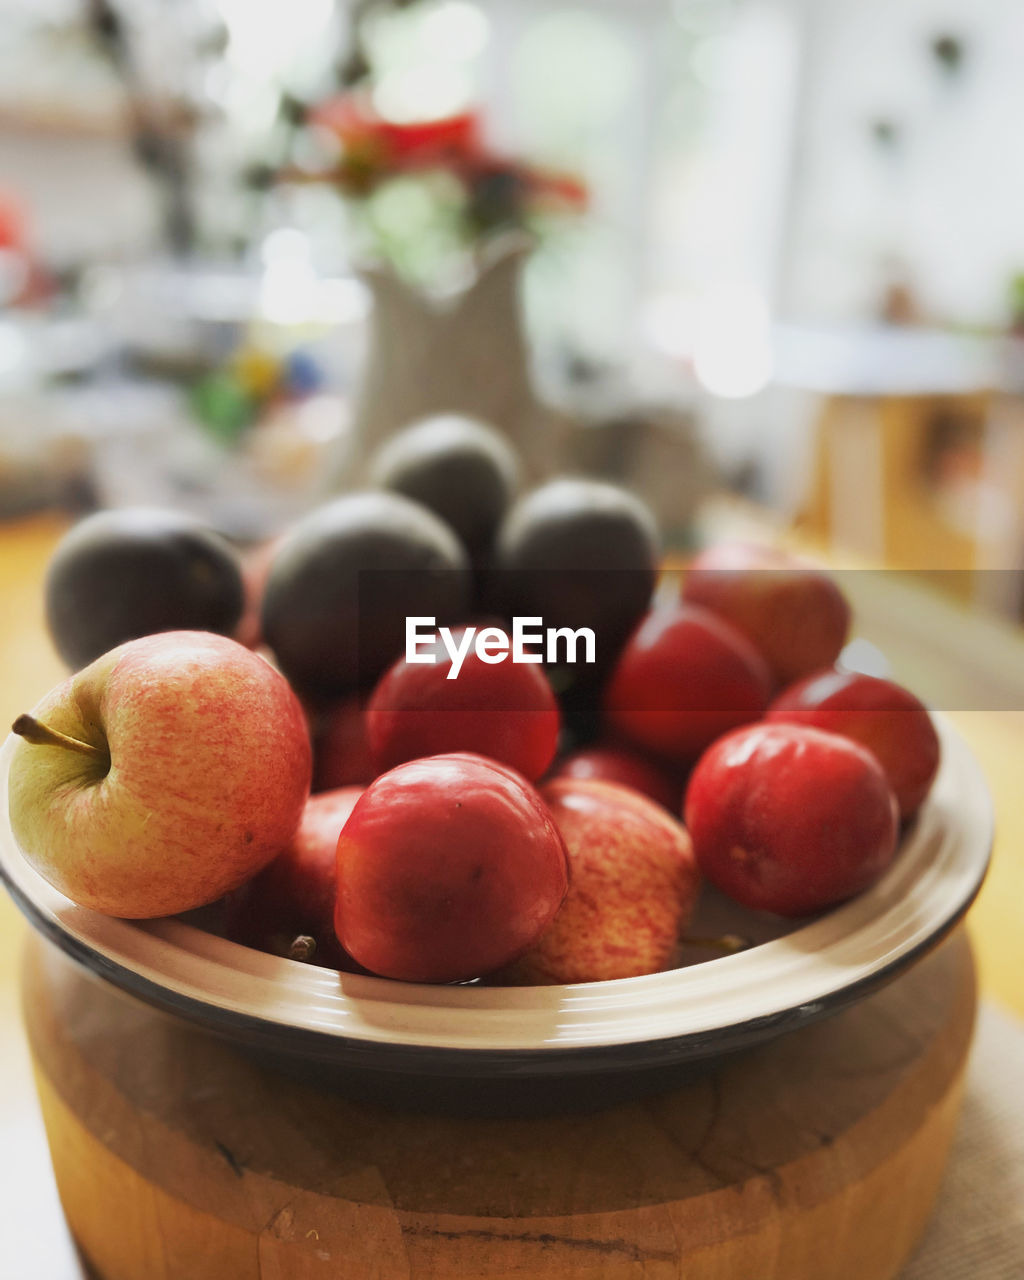 food and drink, food, fruit, healthy eating, produce, plant, freshness, apple, wellbeing, bowl, focus on foreground, peach, container, indoors, no people, fruit bowl, apple - fruit, household equipment, wood, red, table, large group of objects, abundance